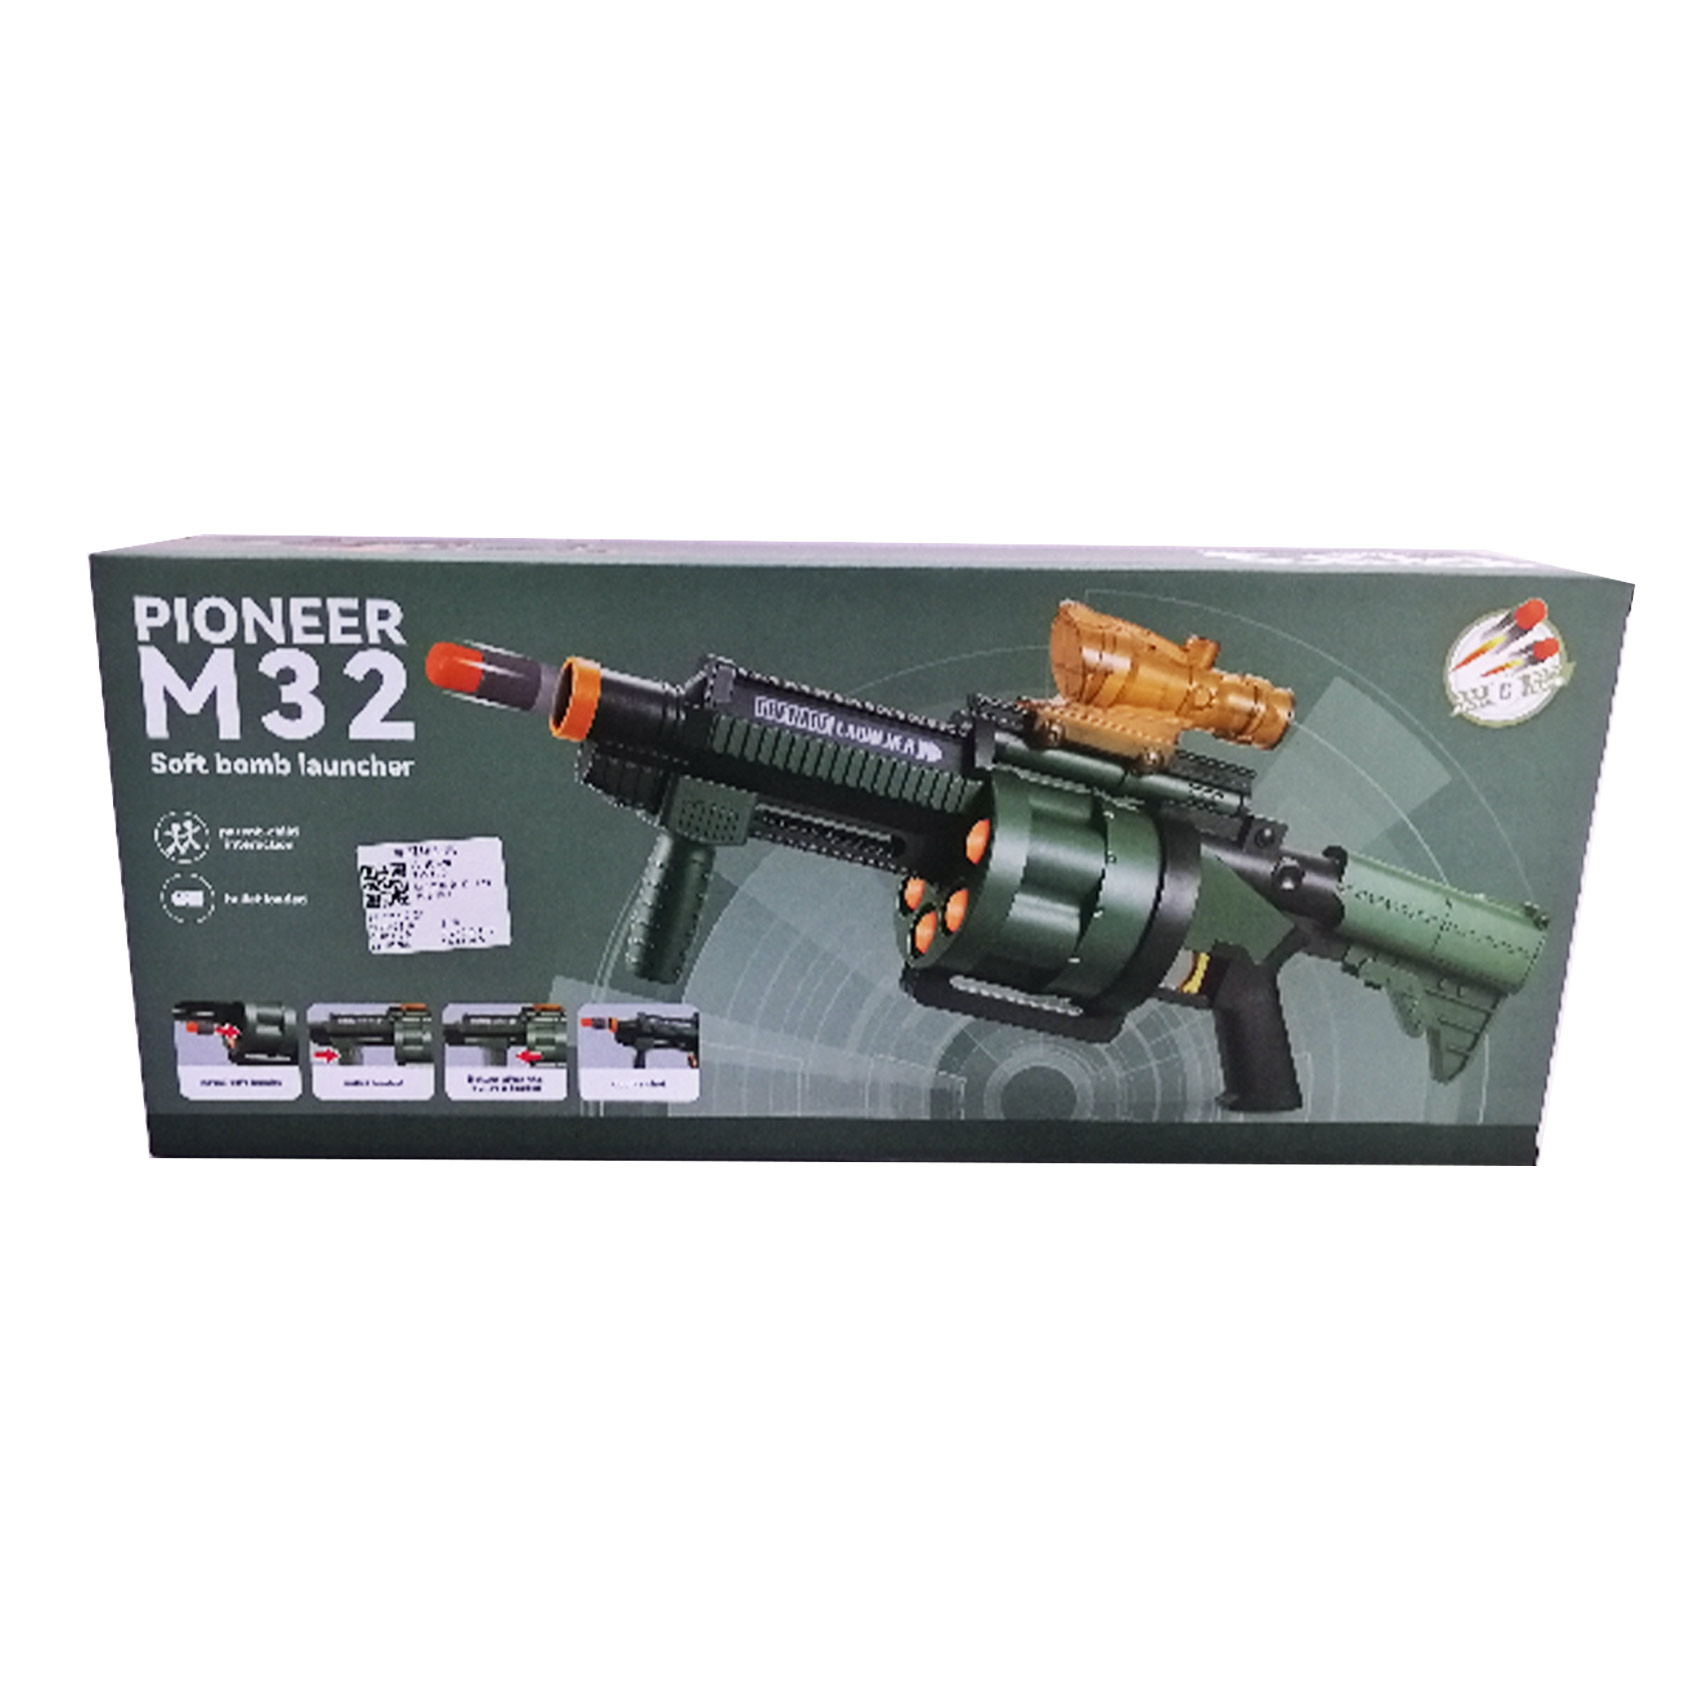 Buy Big Gun Pioneer M32 Toy Online - Shop Toys & Outdoor on Carrefour  Lebanon